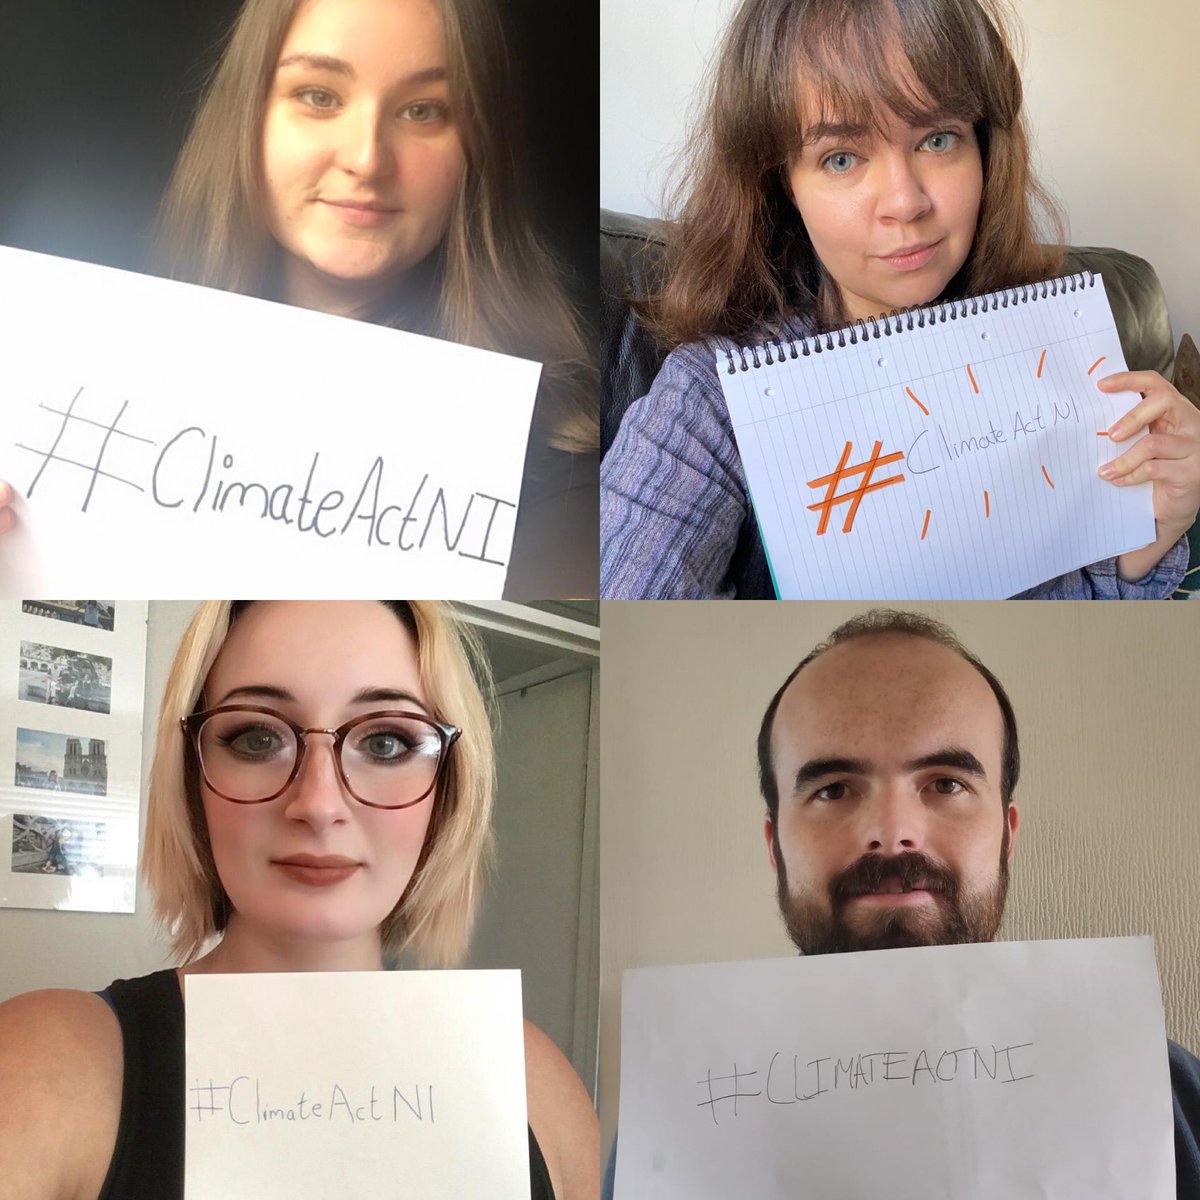 🤯 Northern Ireland is the only part of the U.K. which doesn’t have a Climate Change Act.

‼️The NDNA deal requires the NI Government to create a #ClimateActNI but the Environment Minister is dragging his heels.

📢 We are supporting @ycanibelfast’s call for a #ClimateActNI!